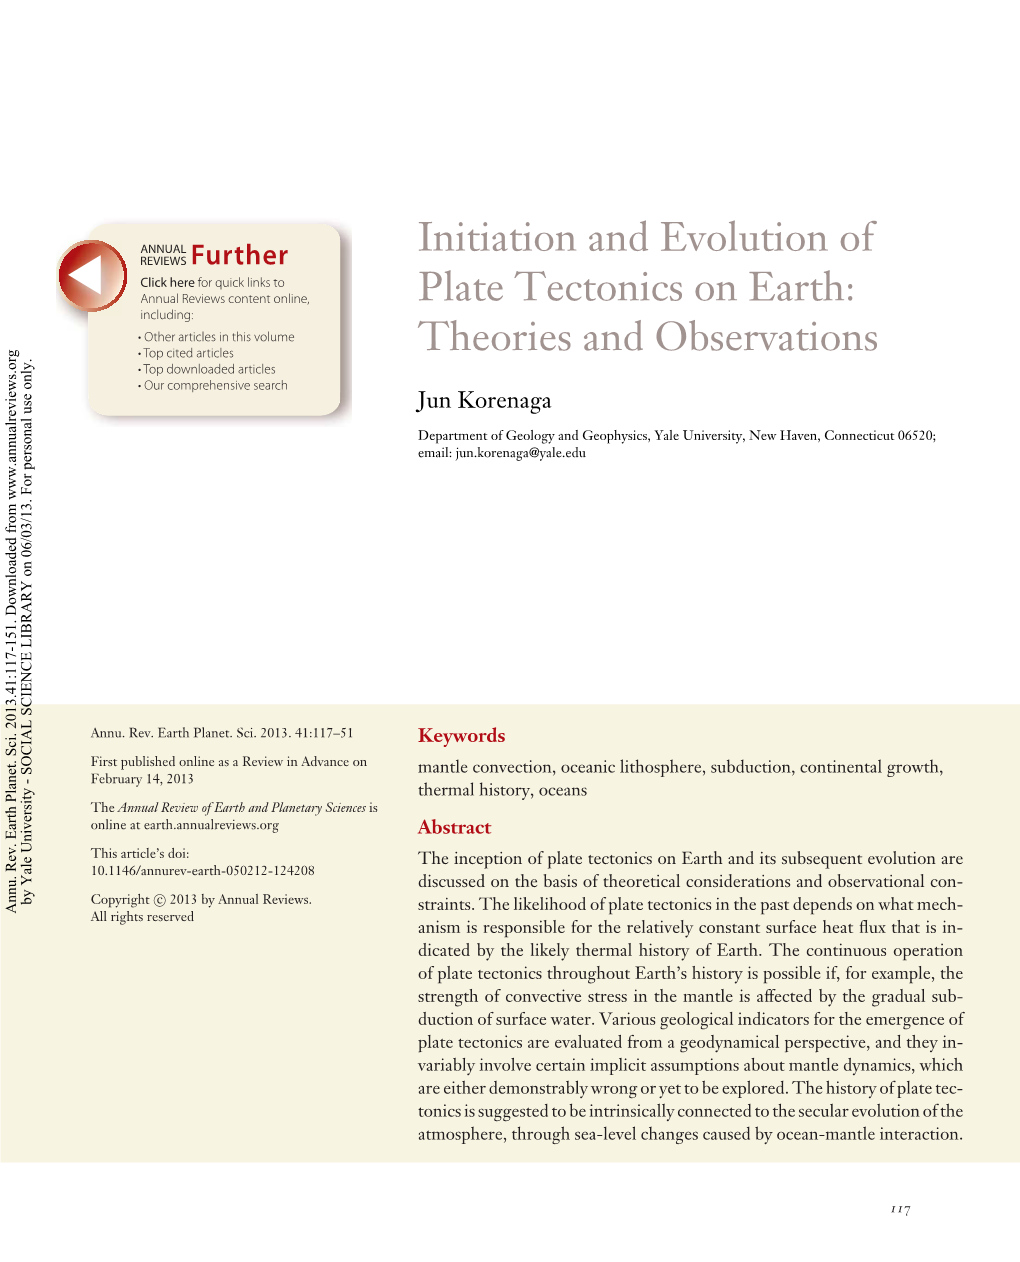 Initiation and Evolution of Plate Tectonics on Earth: Theories and Observations